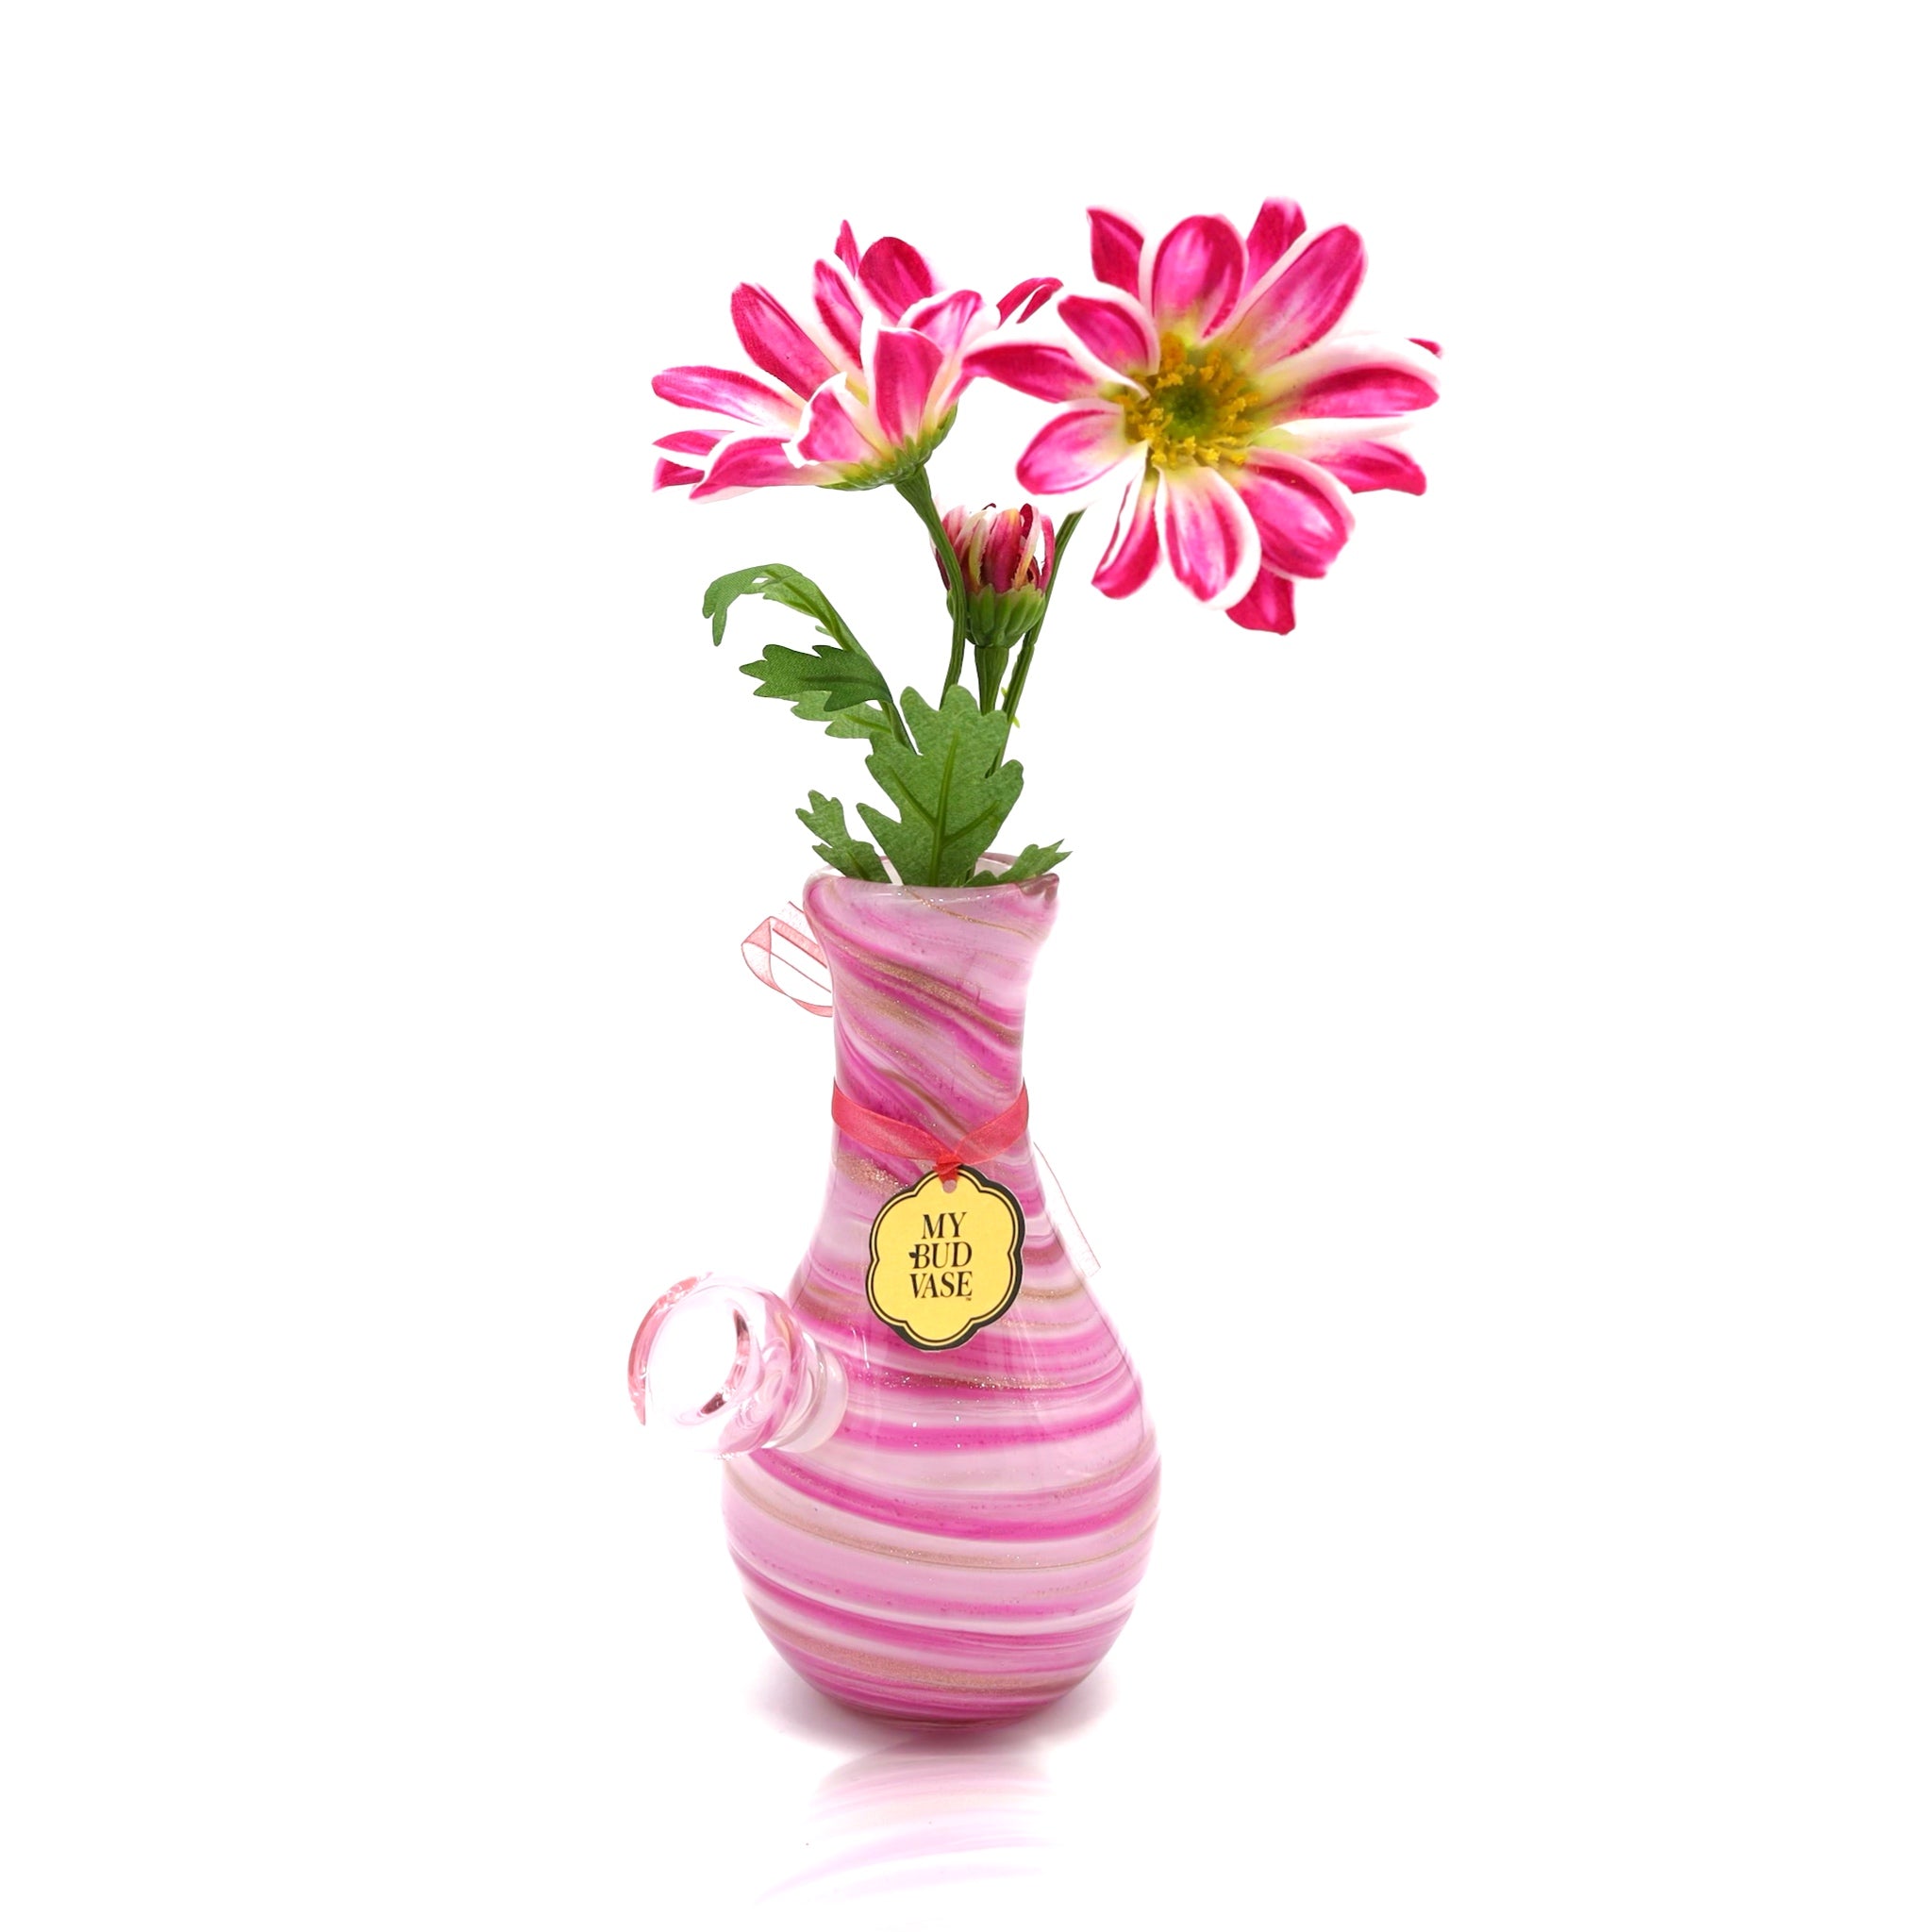 Vases - Buy Vases Online at Affordable Prices in India